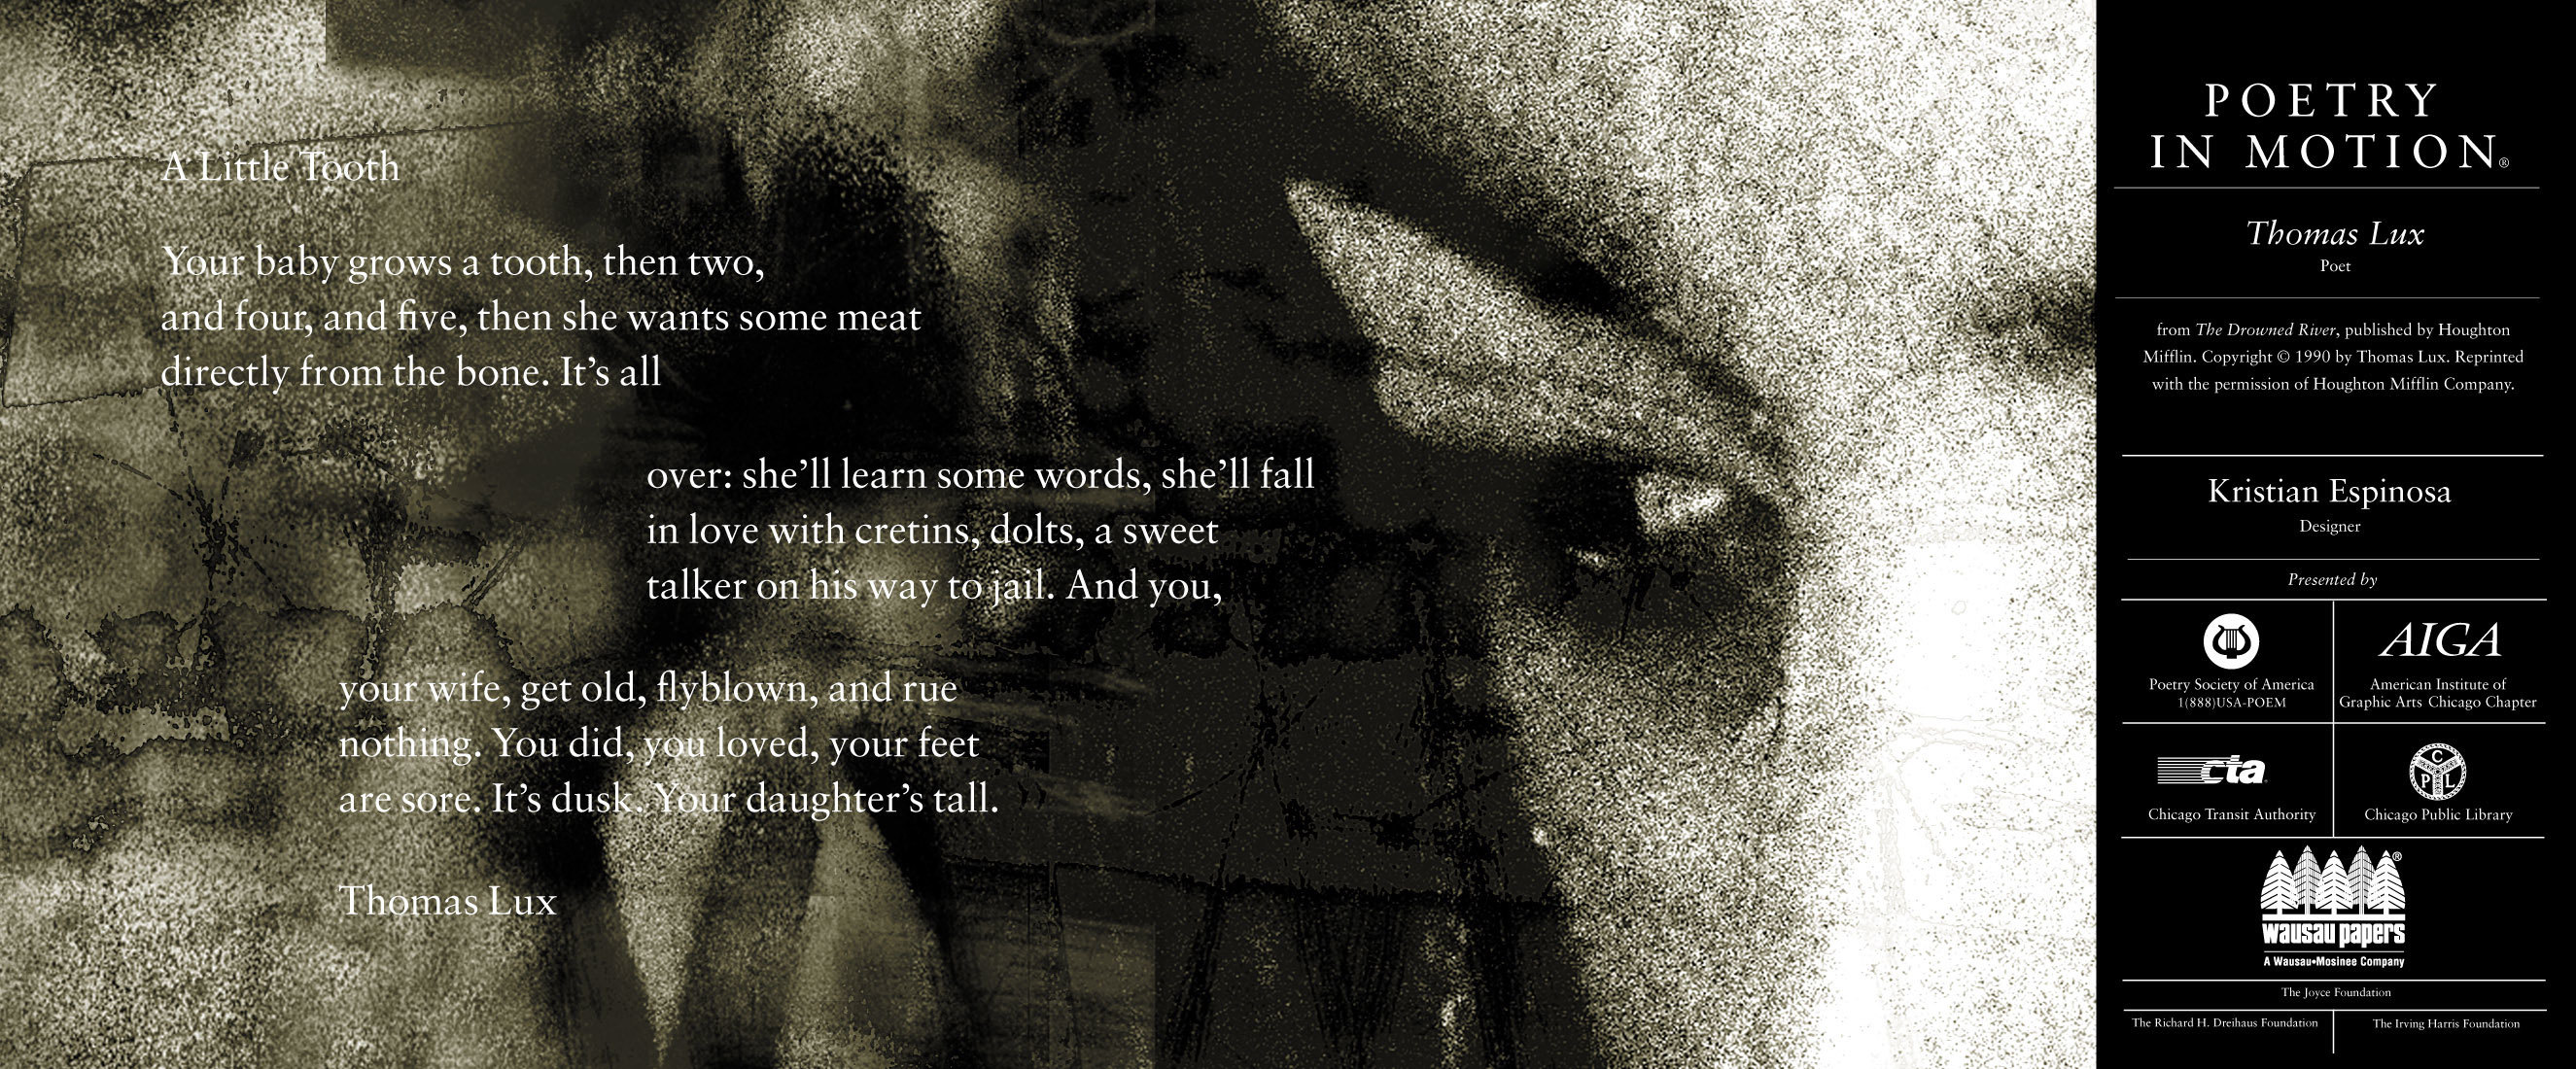 A grey and white poster features the poem A Little Tooth by Thomas Lux. To the right of the poem is half a face glancing down.